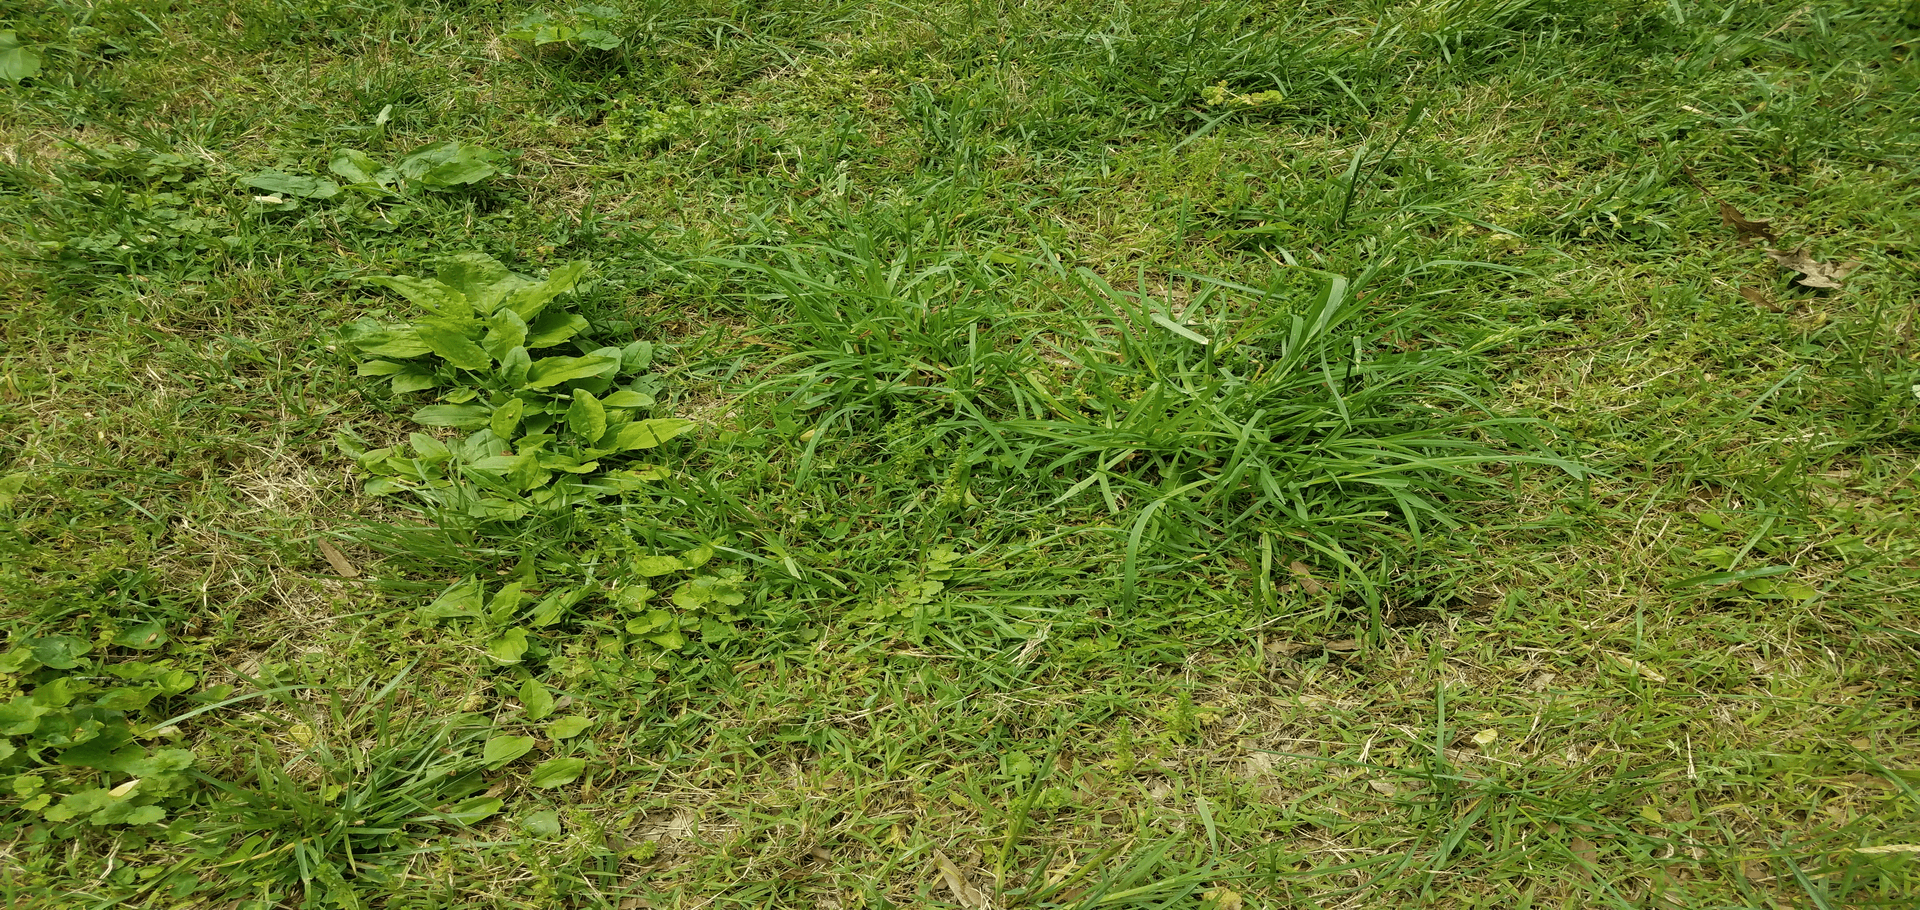 How to take care of weeds in a lawn